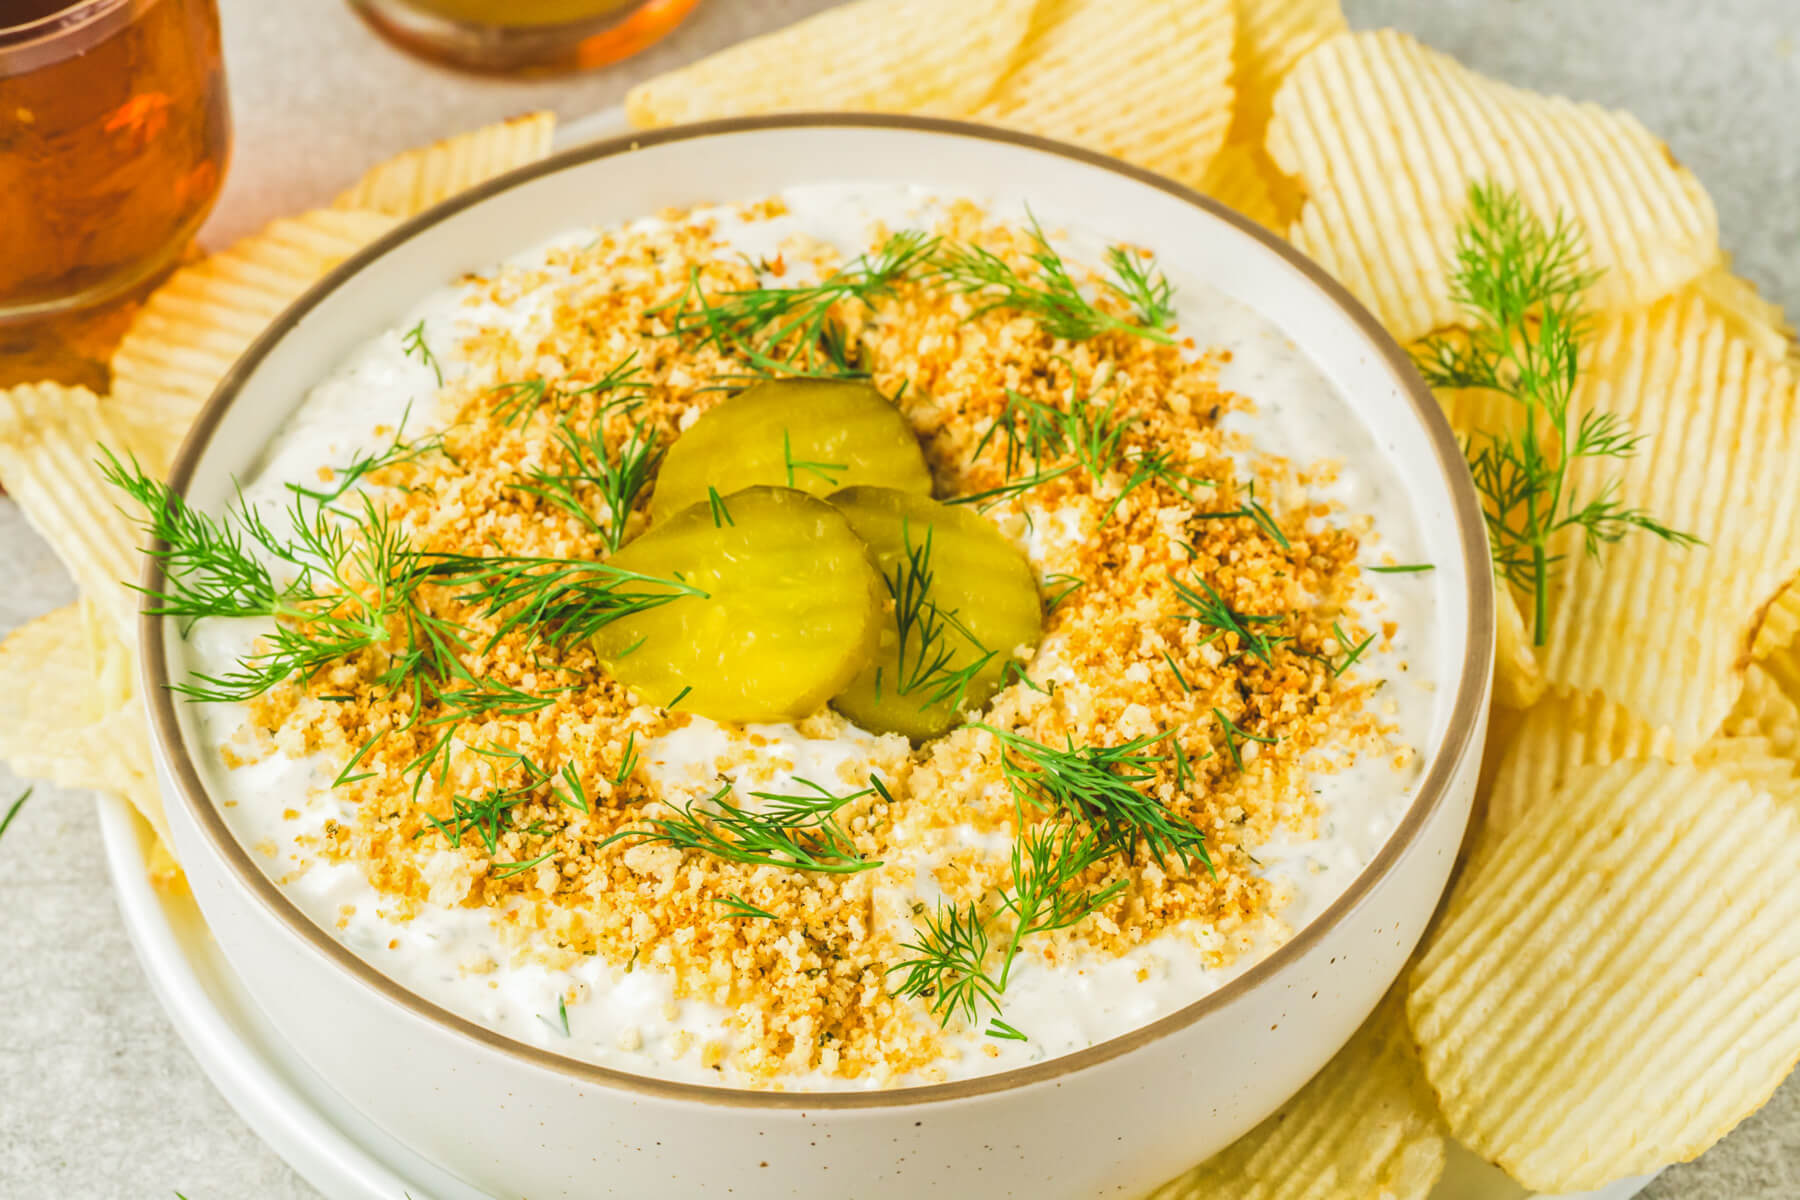 Ridged potato chips surround a bowl of white dill pickle dip topped with golden panko crumbs, fresh dill, and sliced dill pickles.